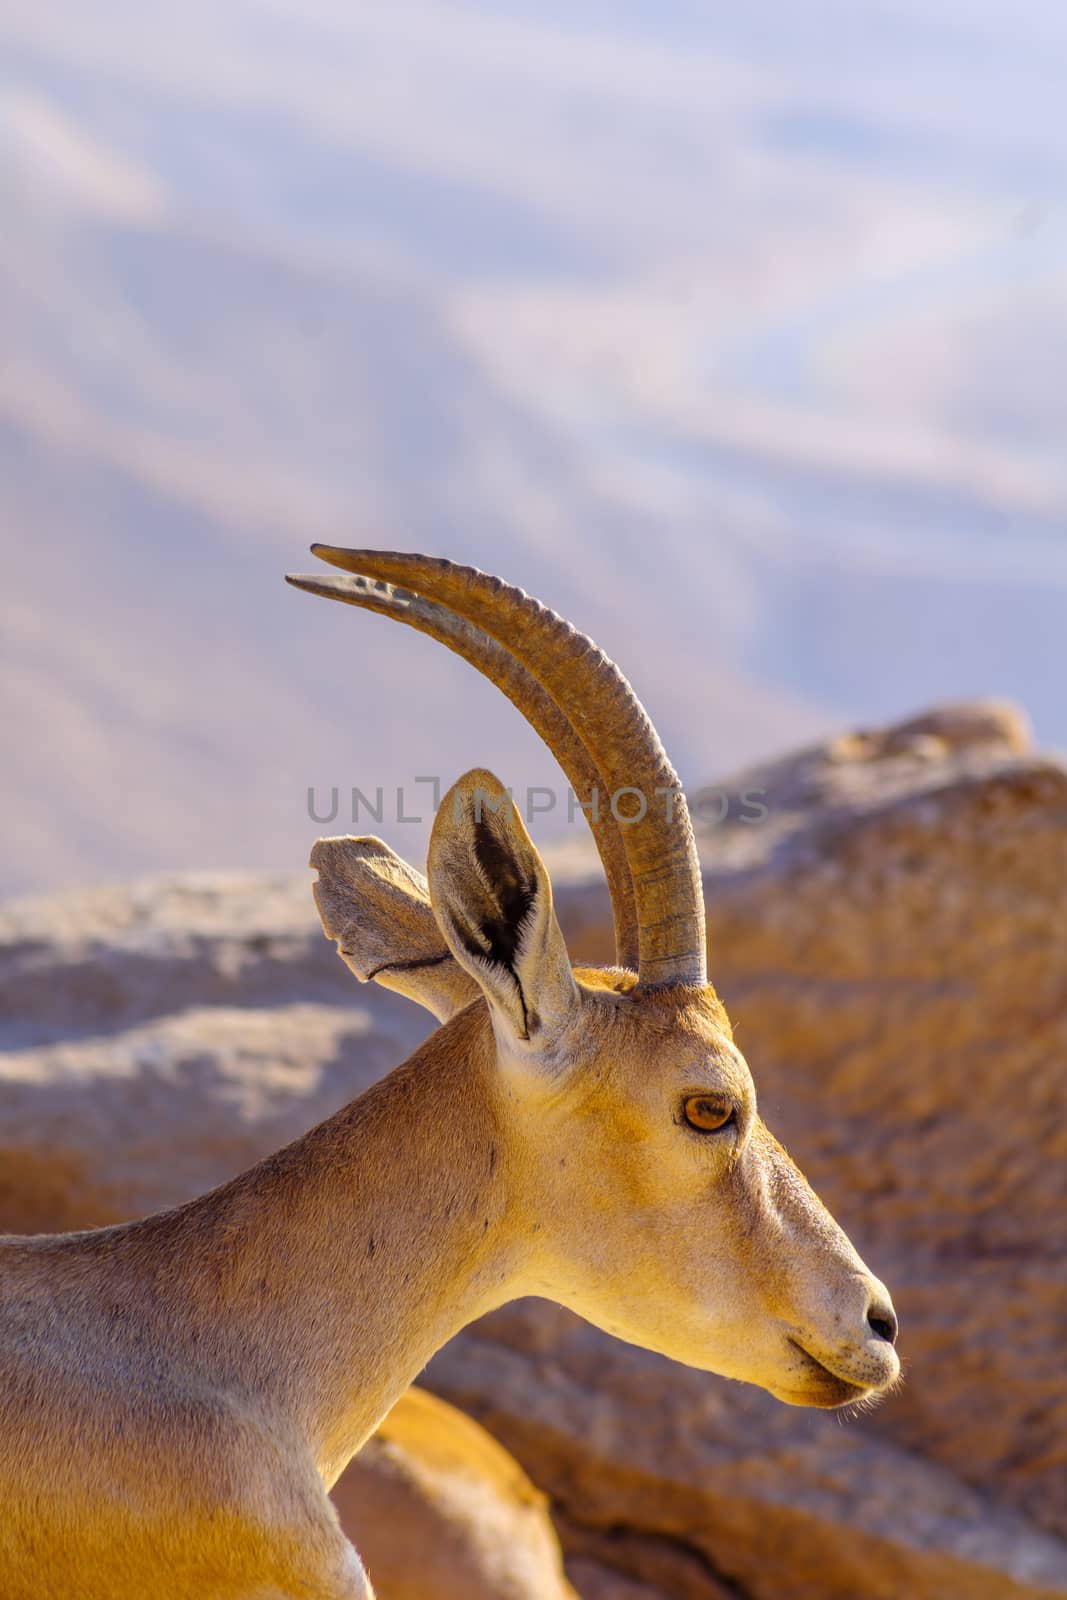 Nubian Ibex on the cliffs of Makhtesh (crater) Ramon by RnDmS